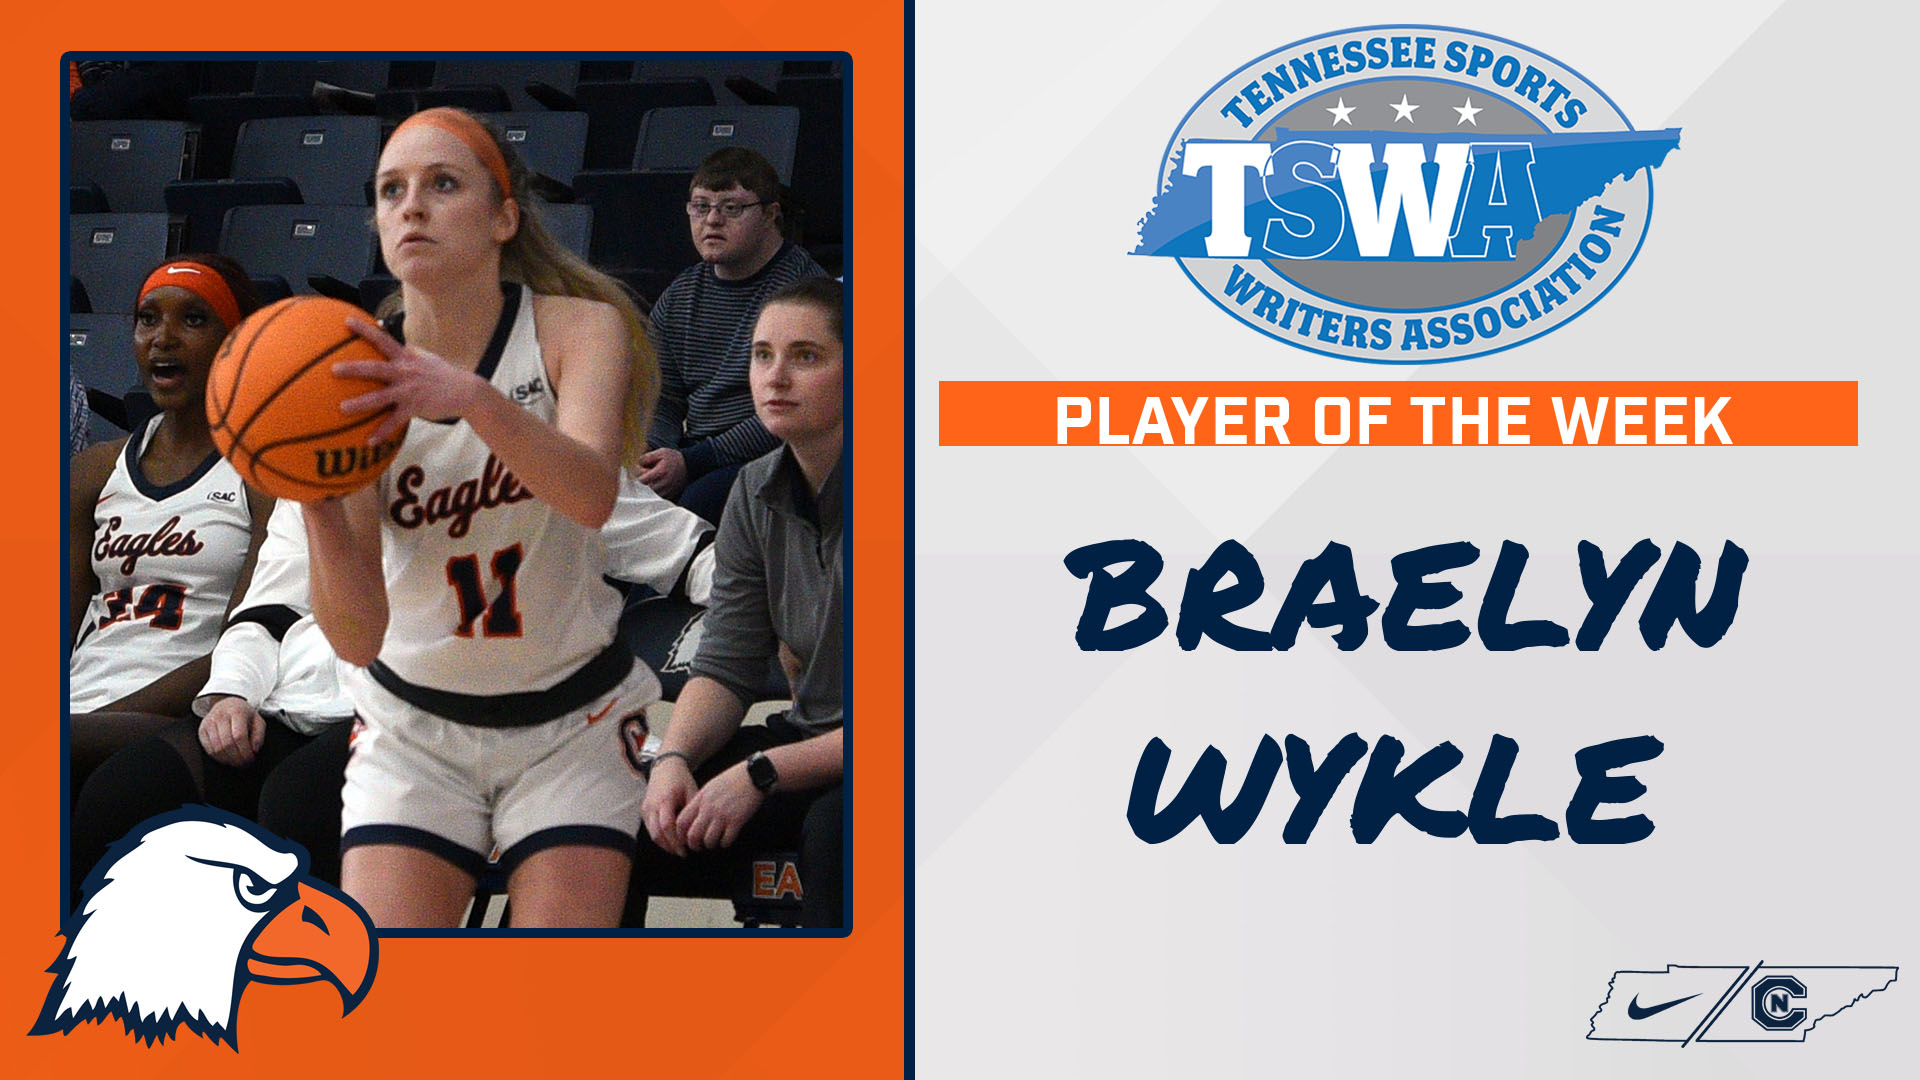 Wykle earns second consecutive TSWA weekly honor